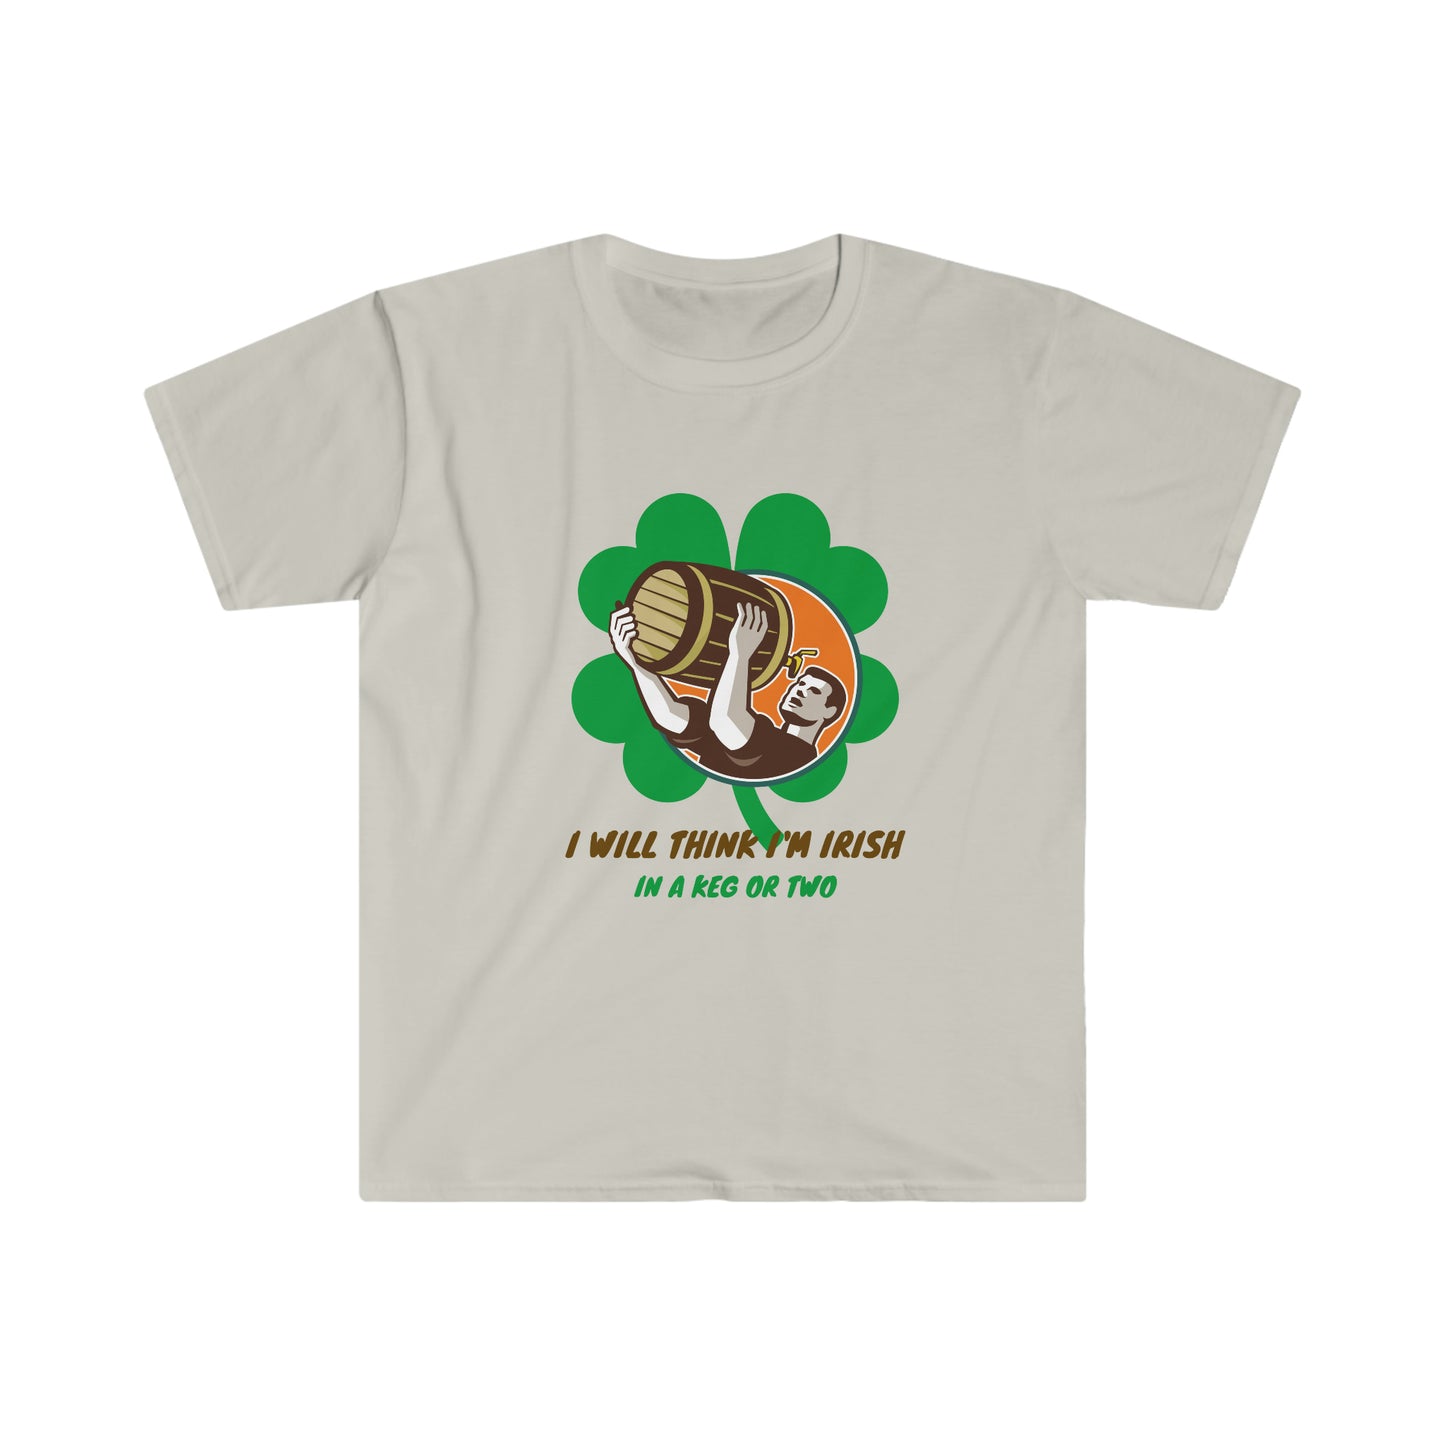 "I will think I am Irish in a keg or two" Essential Comfort Tee